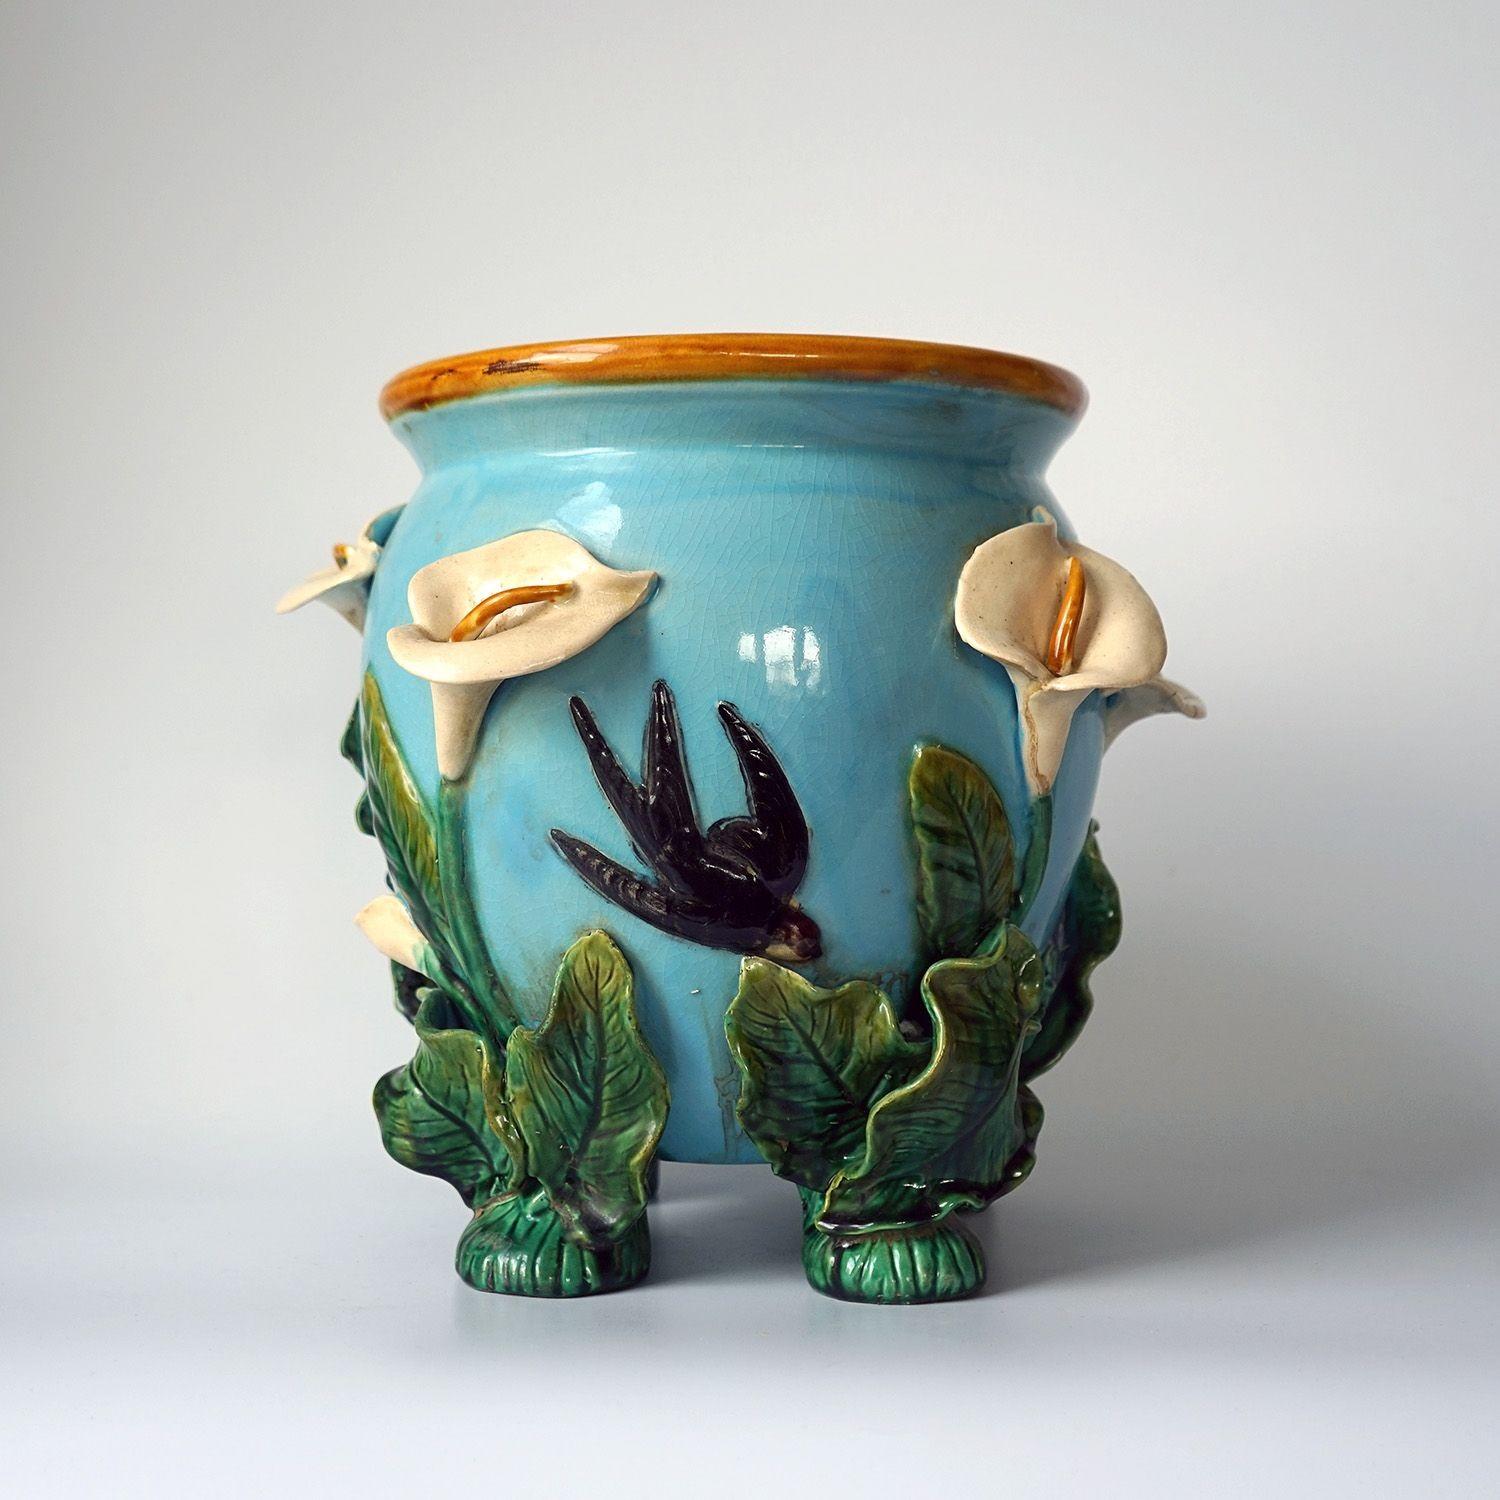 Antique Victorian Polychrome glazed pottery planter

Swallows darting around calla lilies and foliage against the blue sky.

A renowned pattern by the George Jones factory.

Datiing to the 1870s-1880s period.

Perfect to house a houseplant